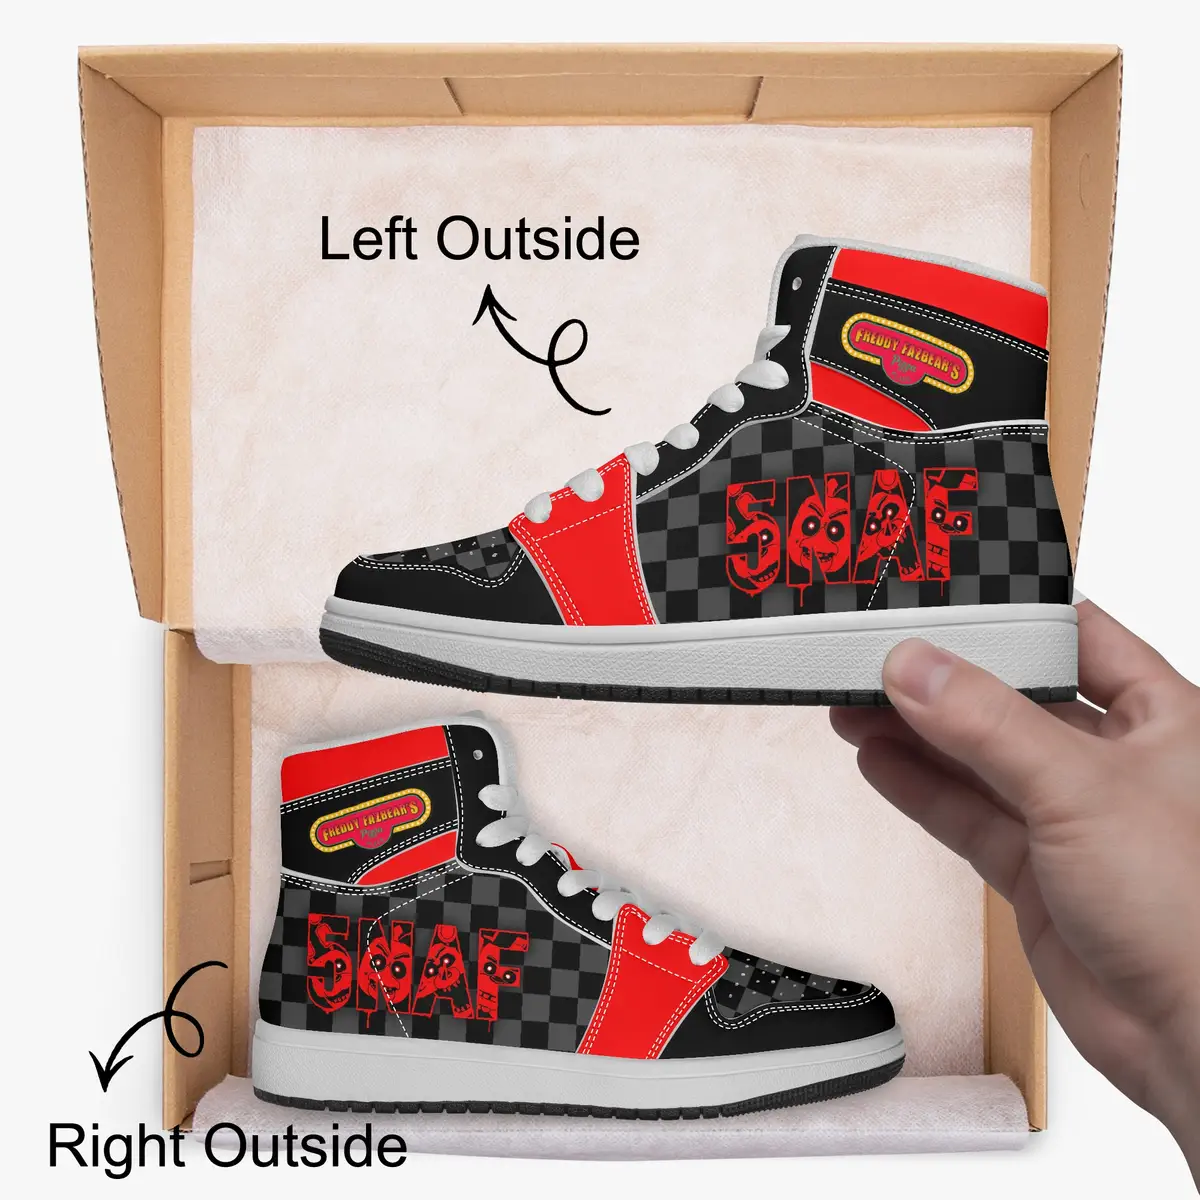 Five Nights at Freddy’s Inspired Character High-Top Kids Black and Red Leather Shoes, FNAF Jordans Style Sneakers Cool Kiddo 24